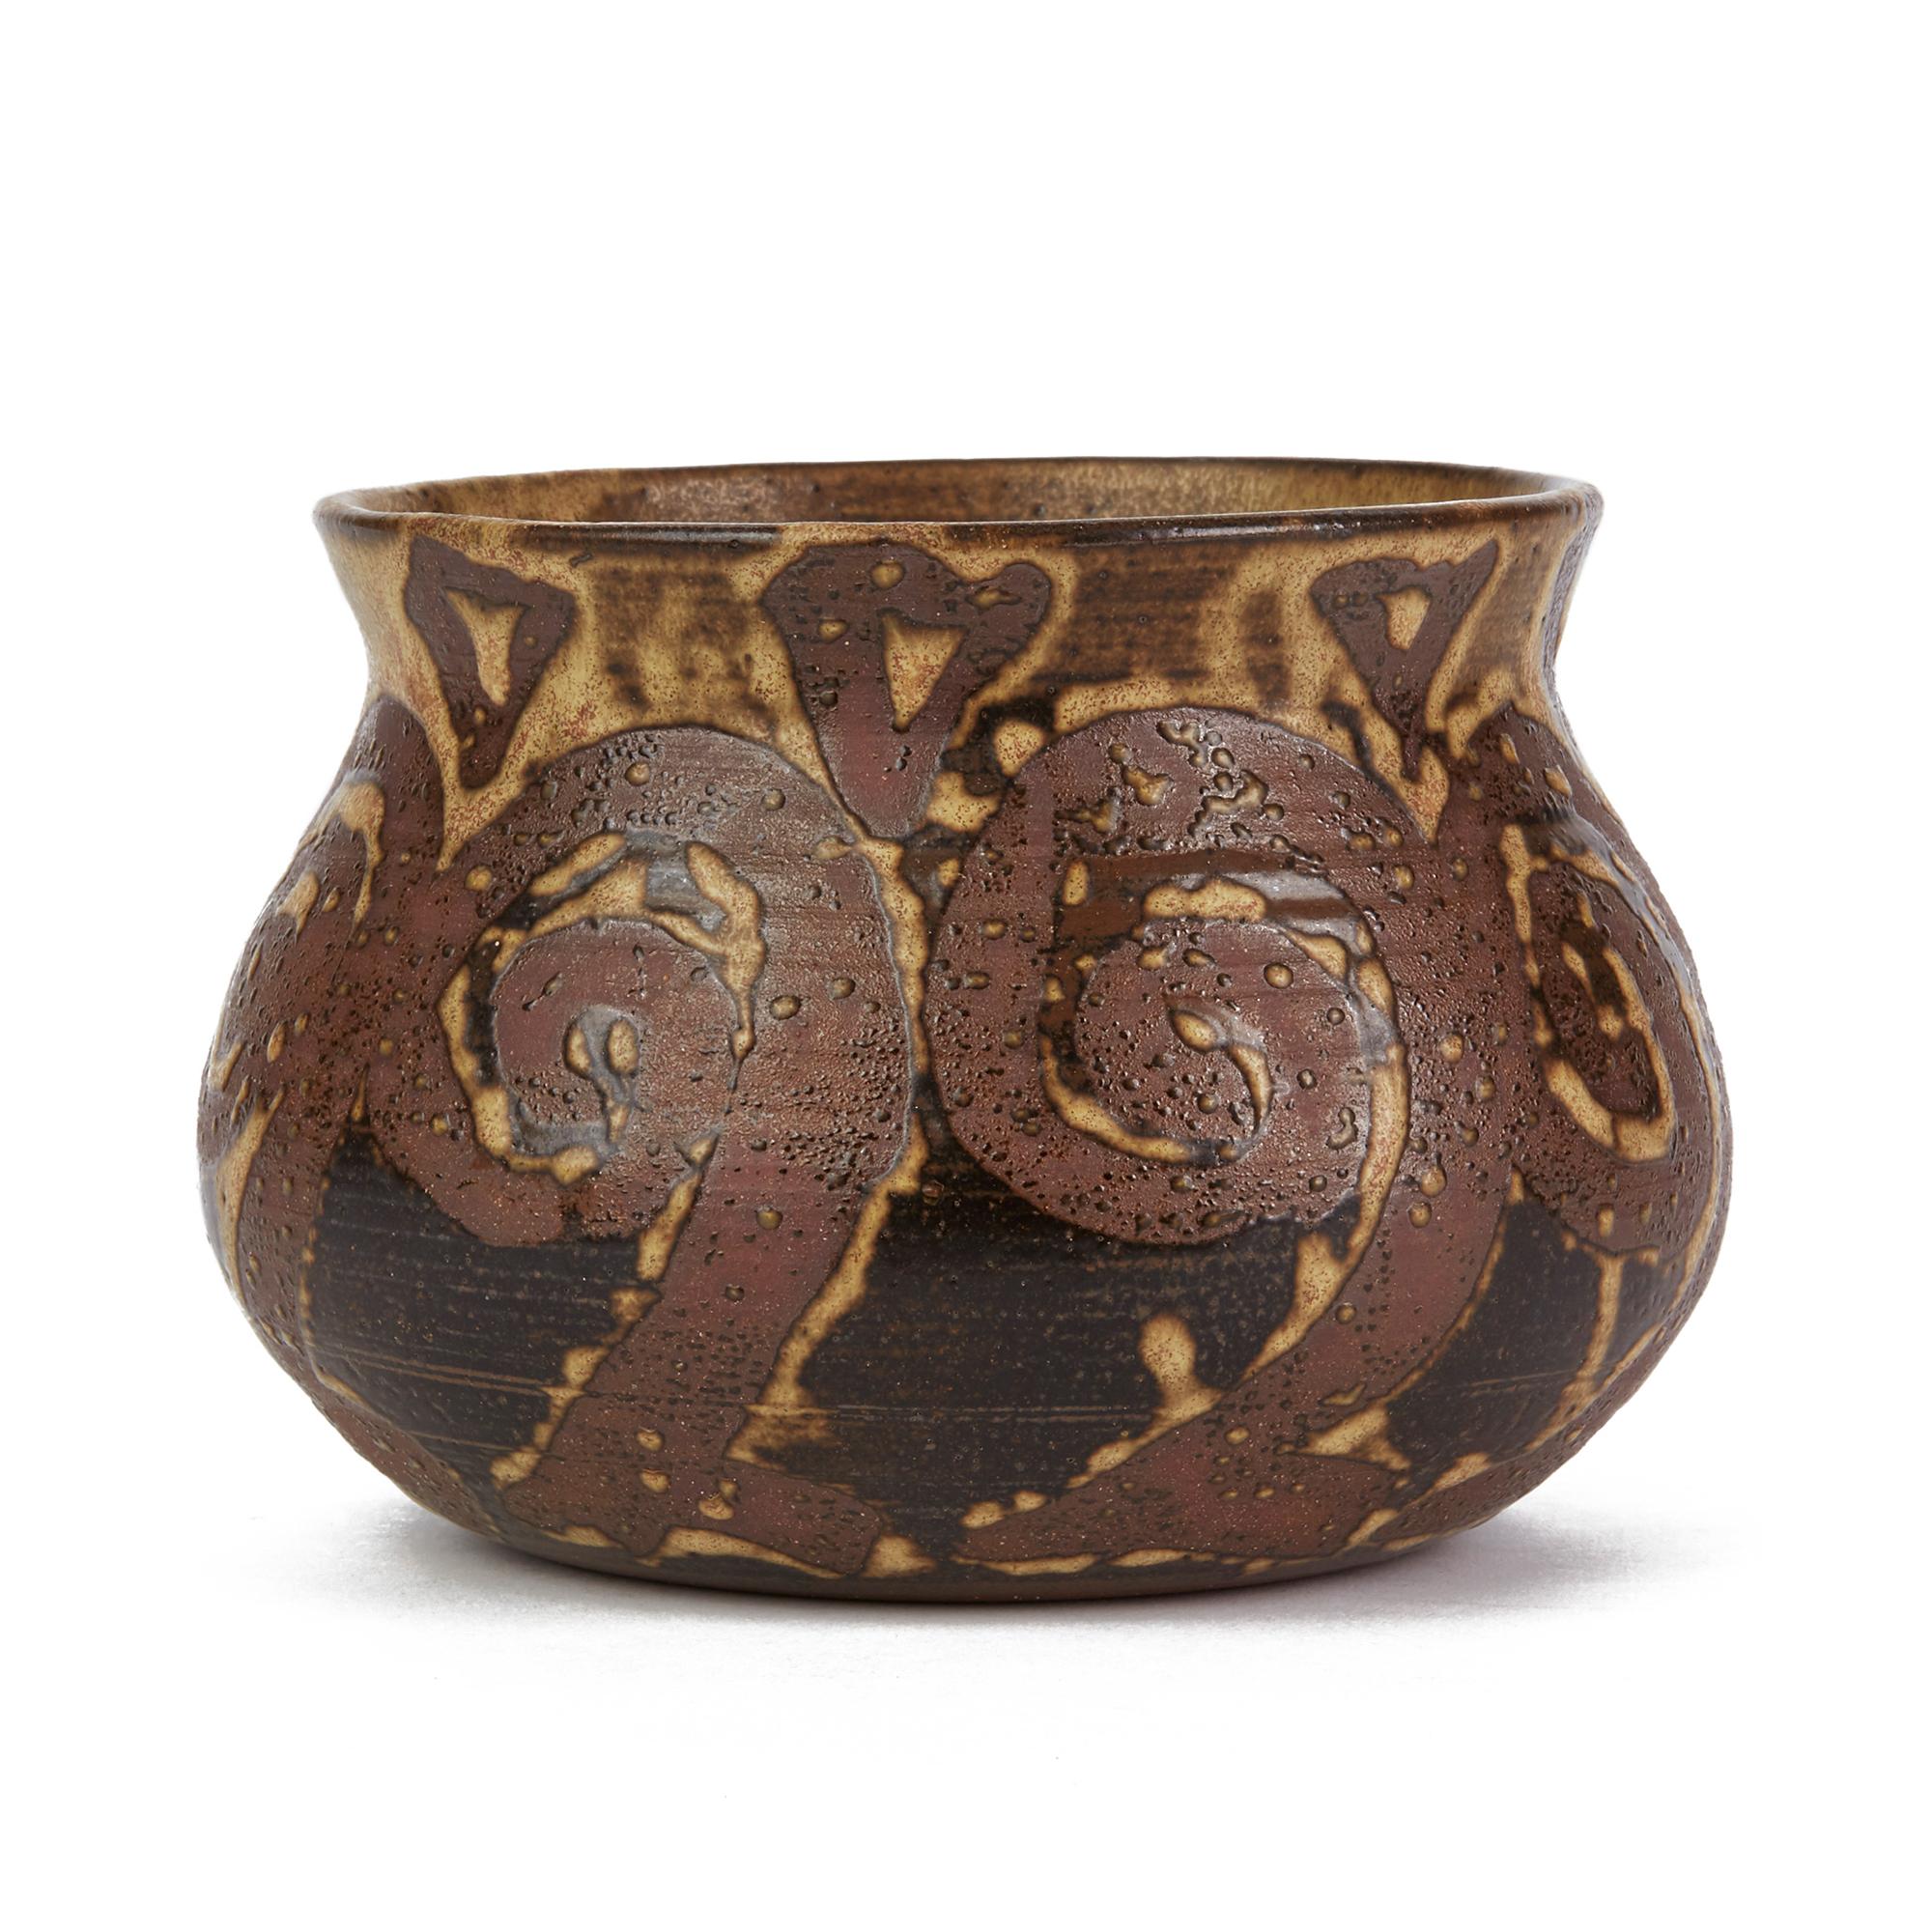 A very stylish and well made vintage studio pottery bowl with a tenmoku glazed swirl design around the body on a light mottled brown ground. The hand thrown bowl is finely made in red terracotta and has an impressed flower mark to the base. Offered